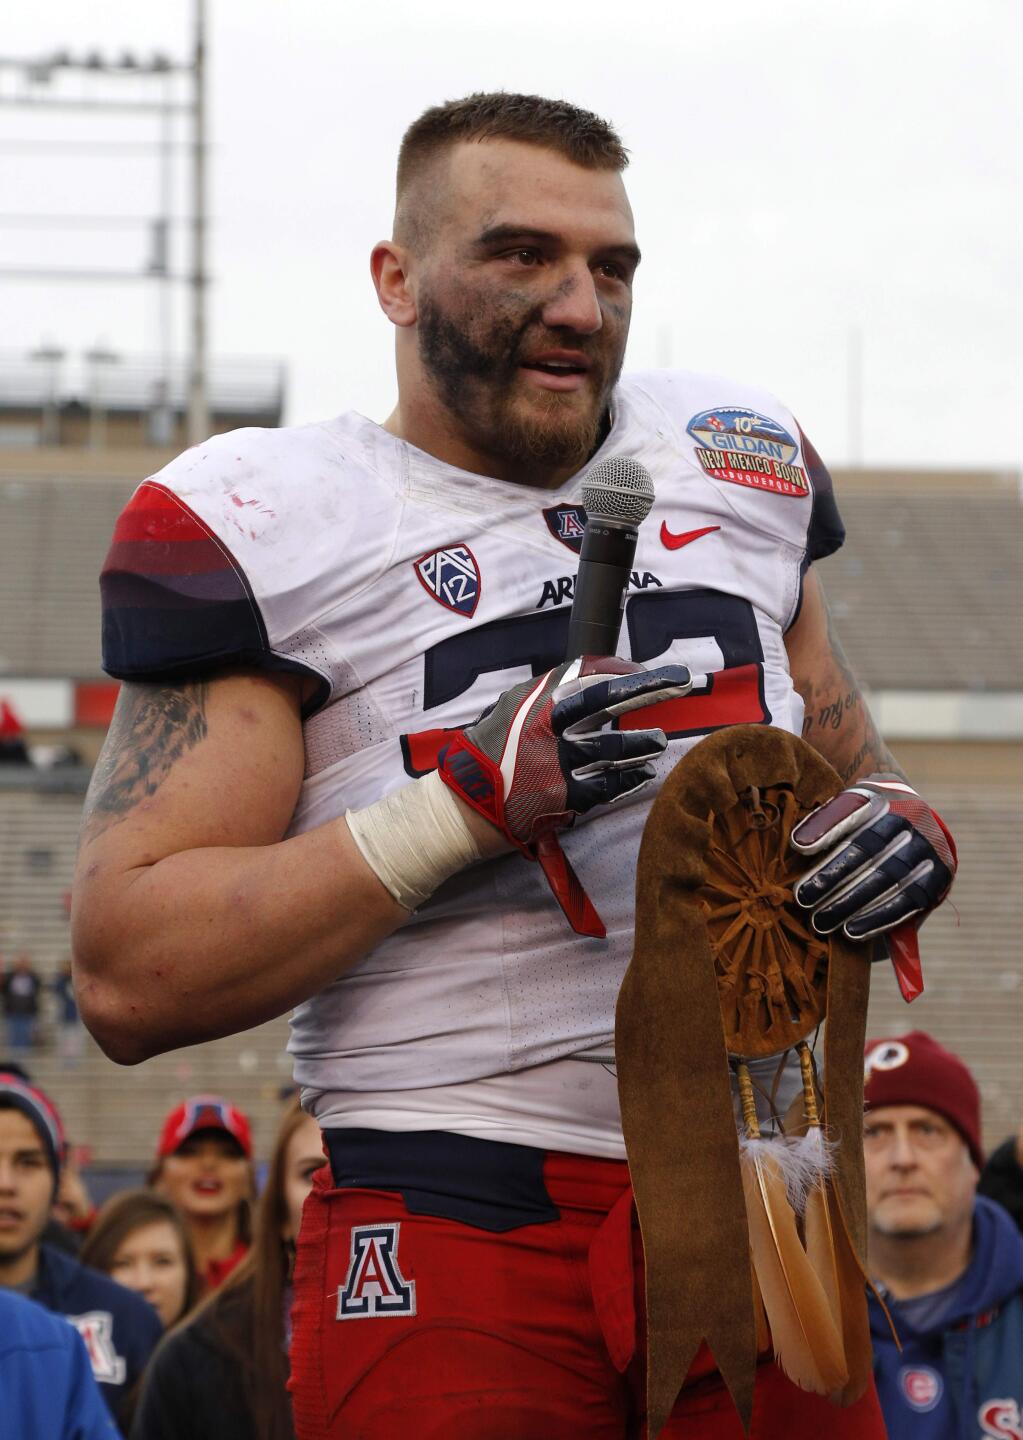 Arizona linebacker Scooby Wright III thanks the crowd for support while receiving the Defensive Player of the Game award after the New Mexico Bowl NCAA college football game against New Mexico in Albuquerque, N.M., Saturday, Dec. 19, 2015. Arizona won 45-37. (AP Photo/Andres Leighton)